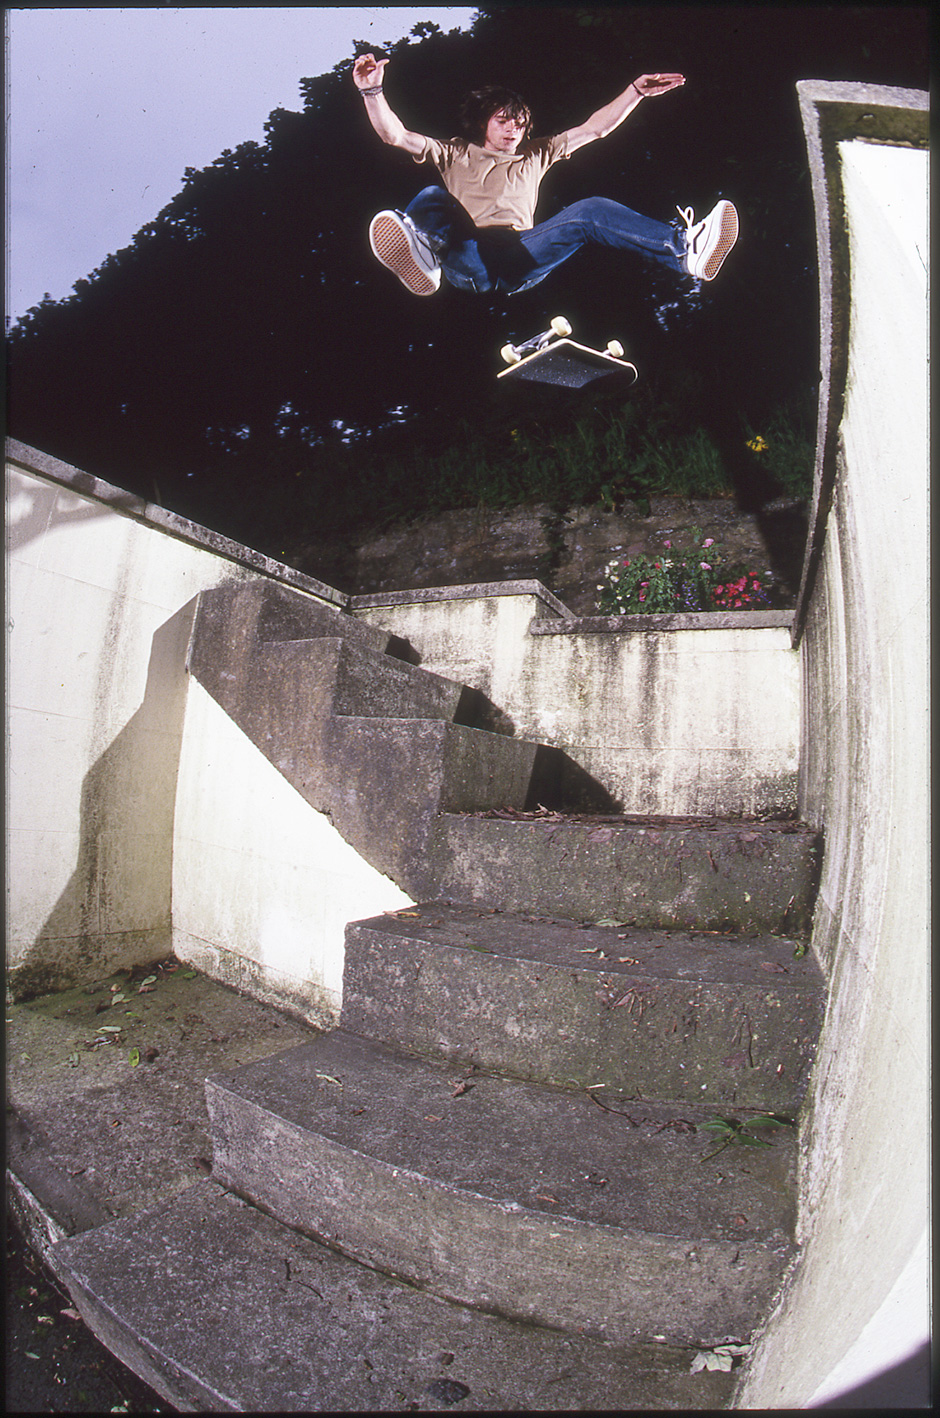 Olly Todd varial heelflips a staircase. Shot by Leo Sharp